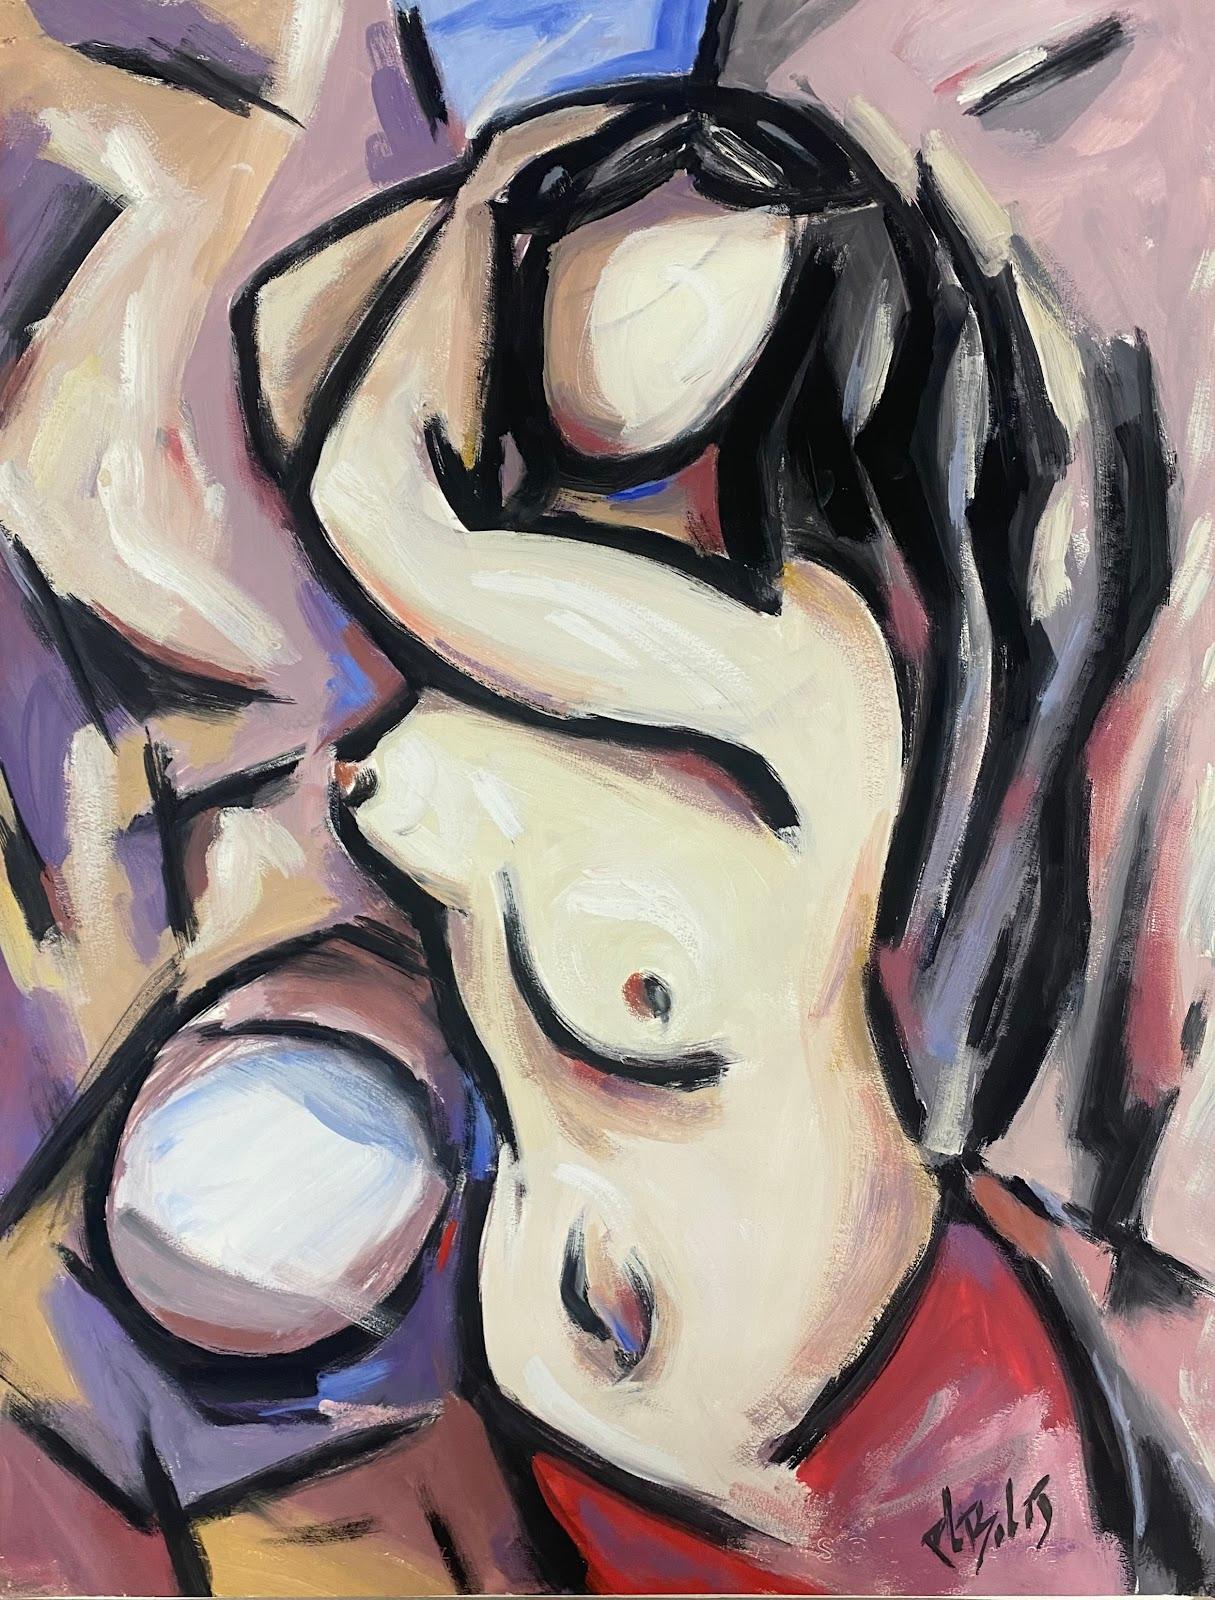 Paul-Louis Bolot (French 1918-2003) Figurative Painting - 20th Century French Modernist Gouche Painting Nude Lady Abstract Portrait